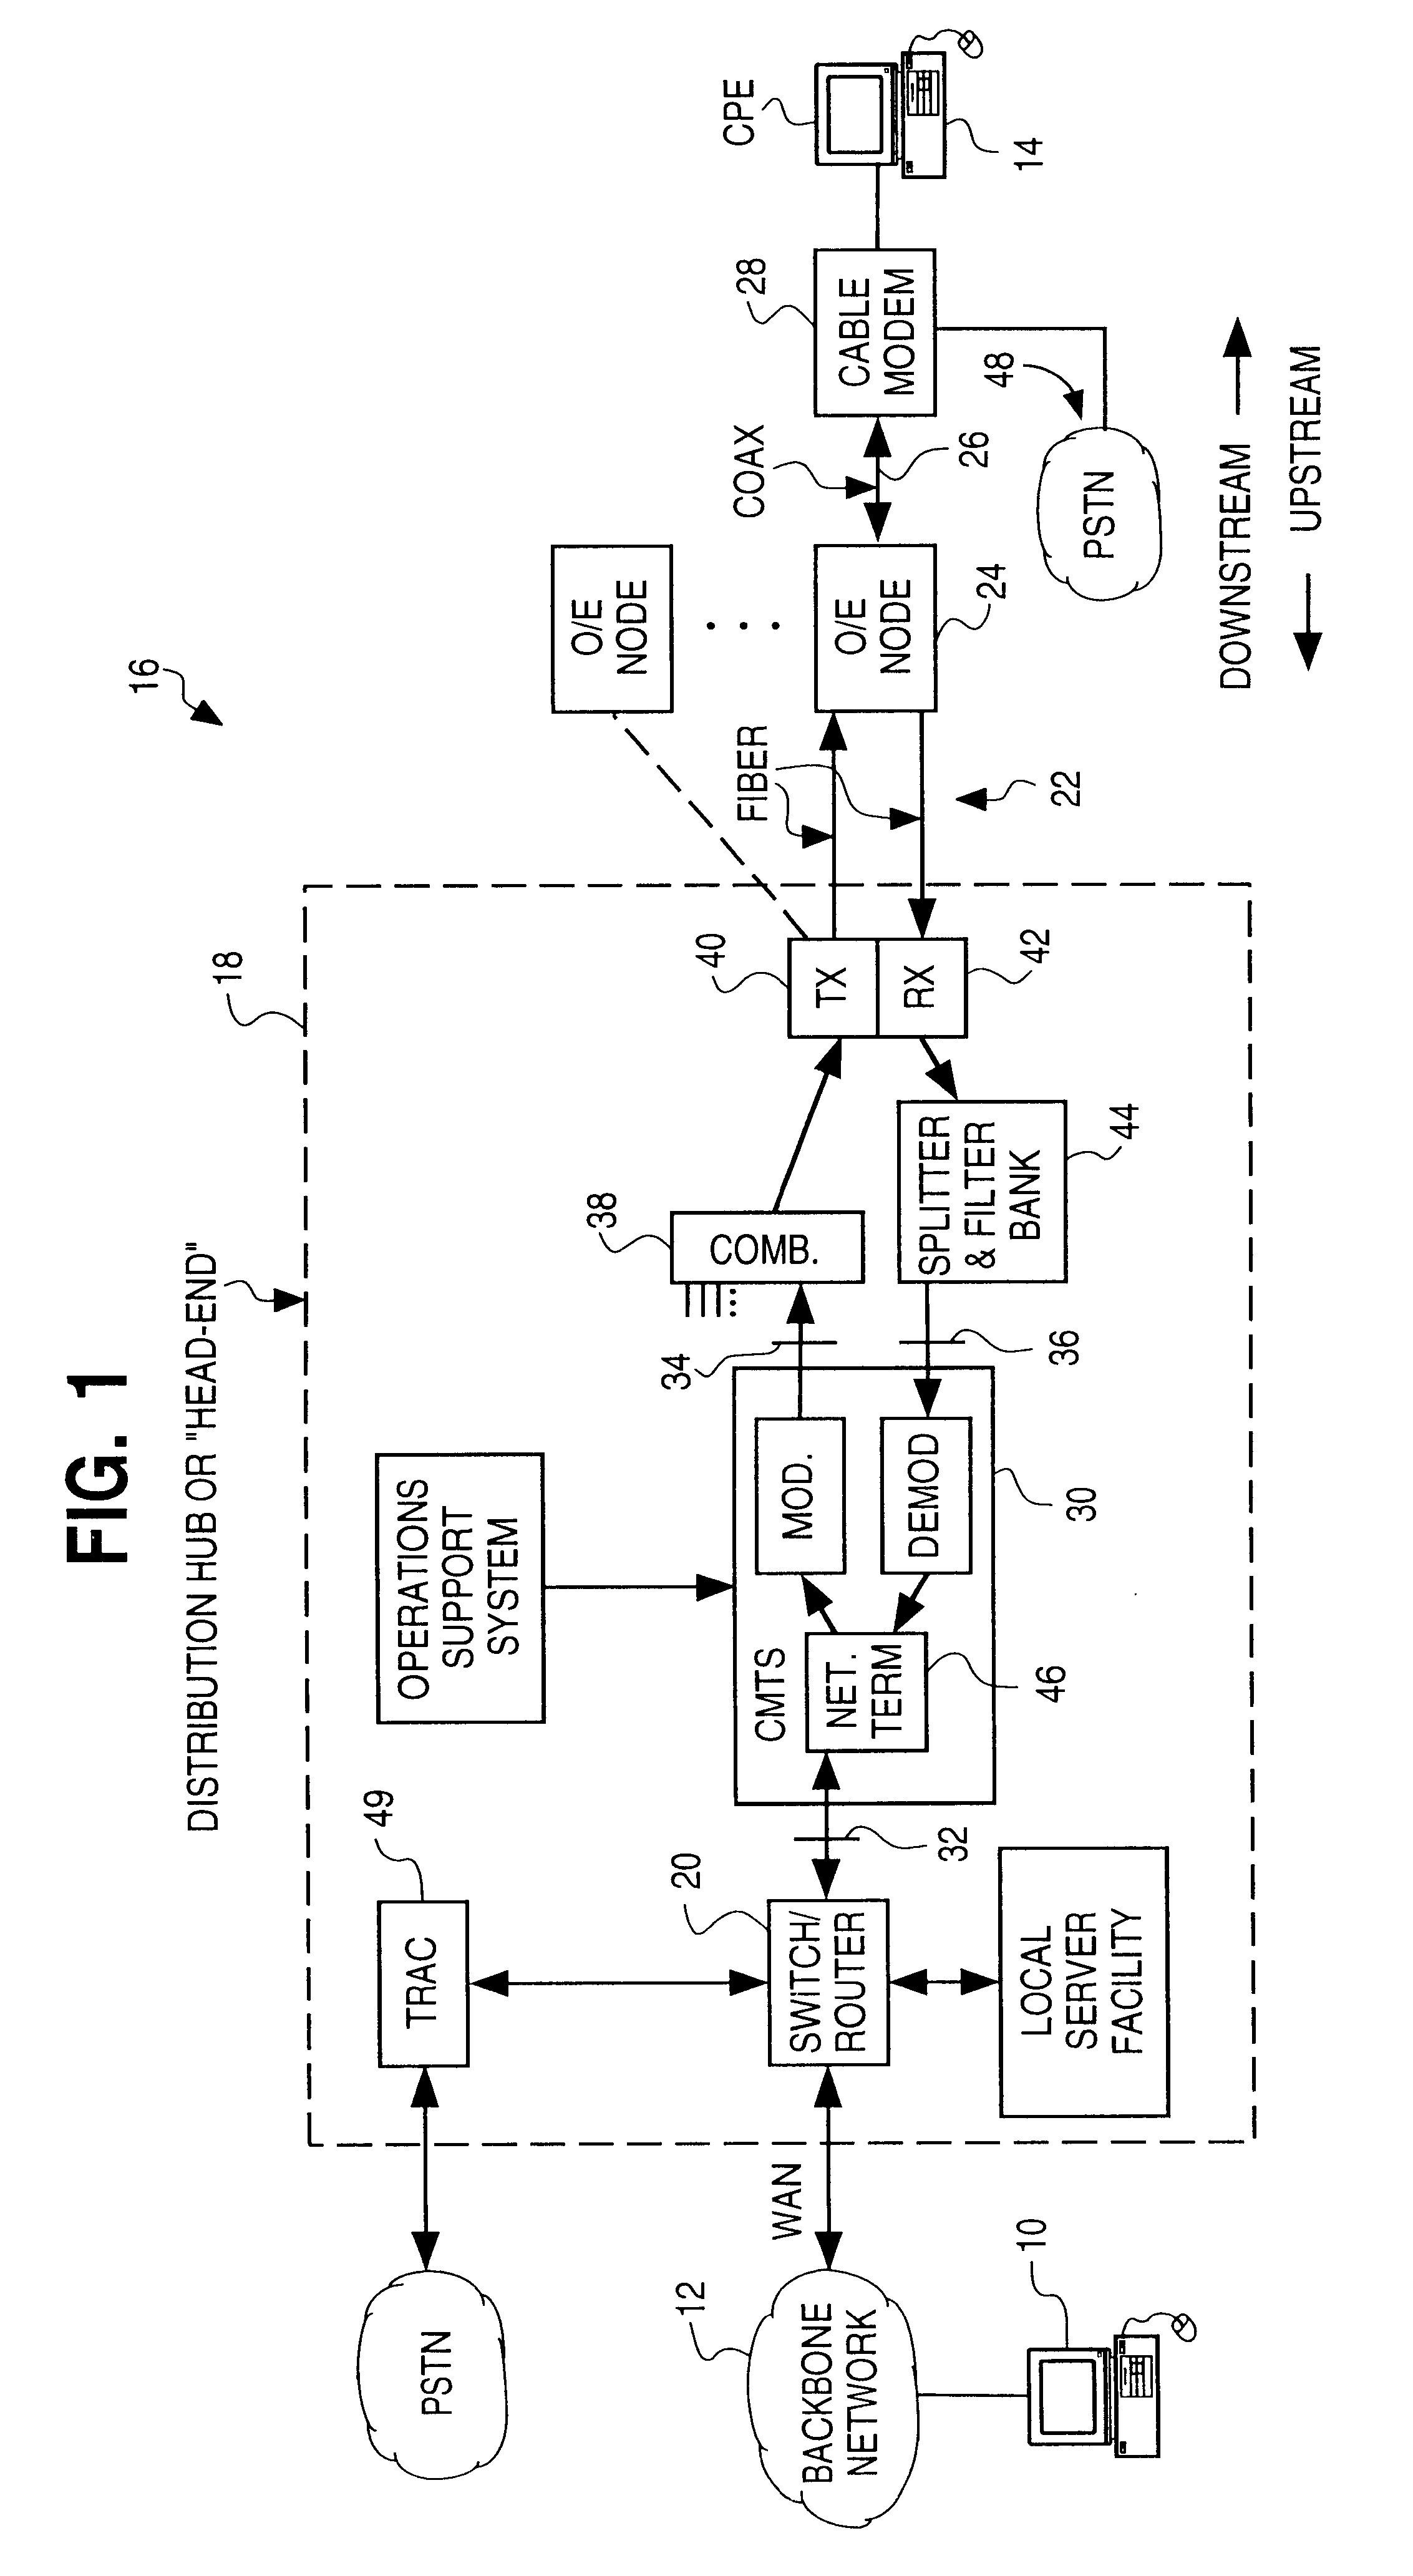 Upstream channel multicast media access control (MAC) address method for data-over-cable systems